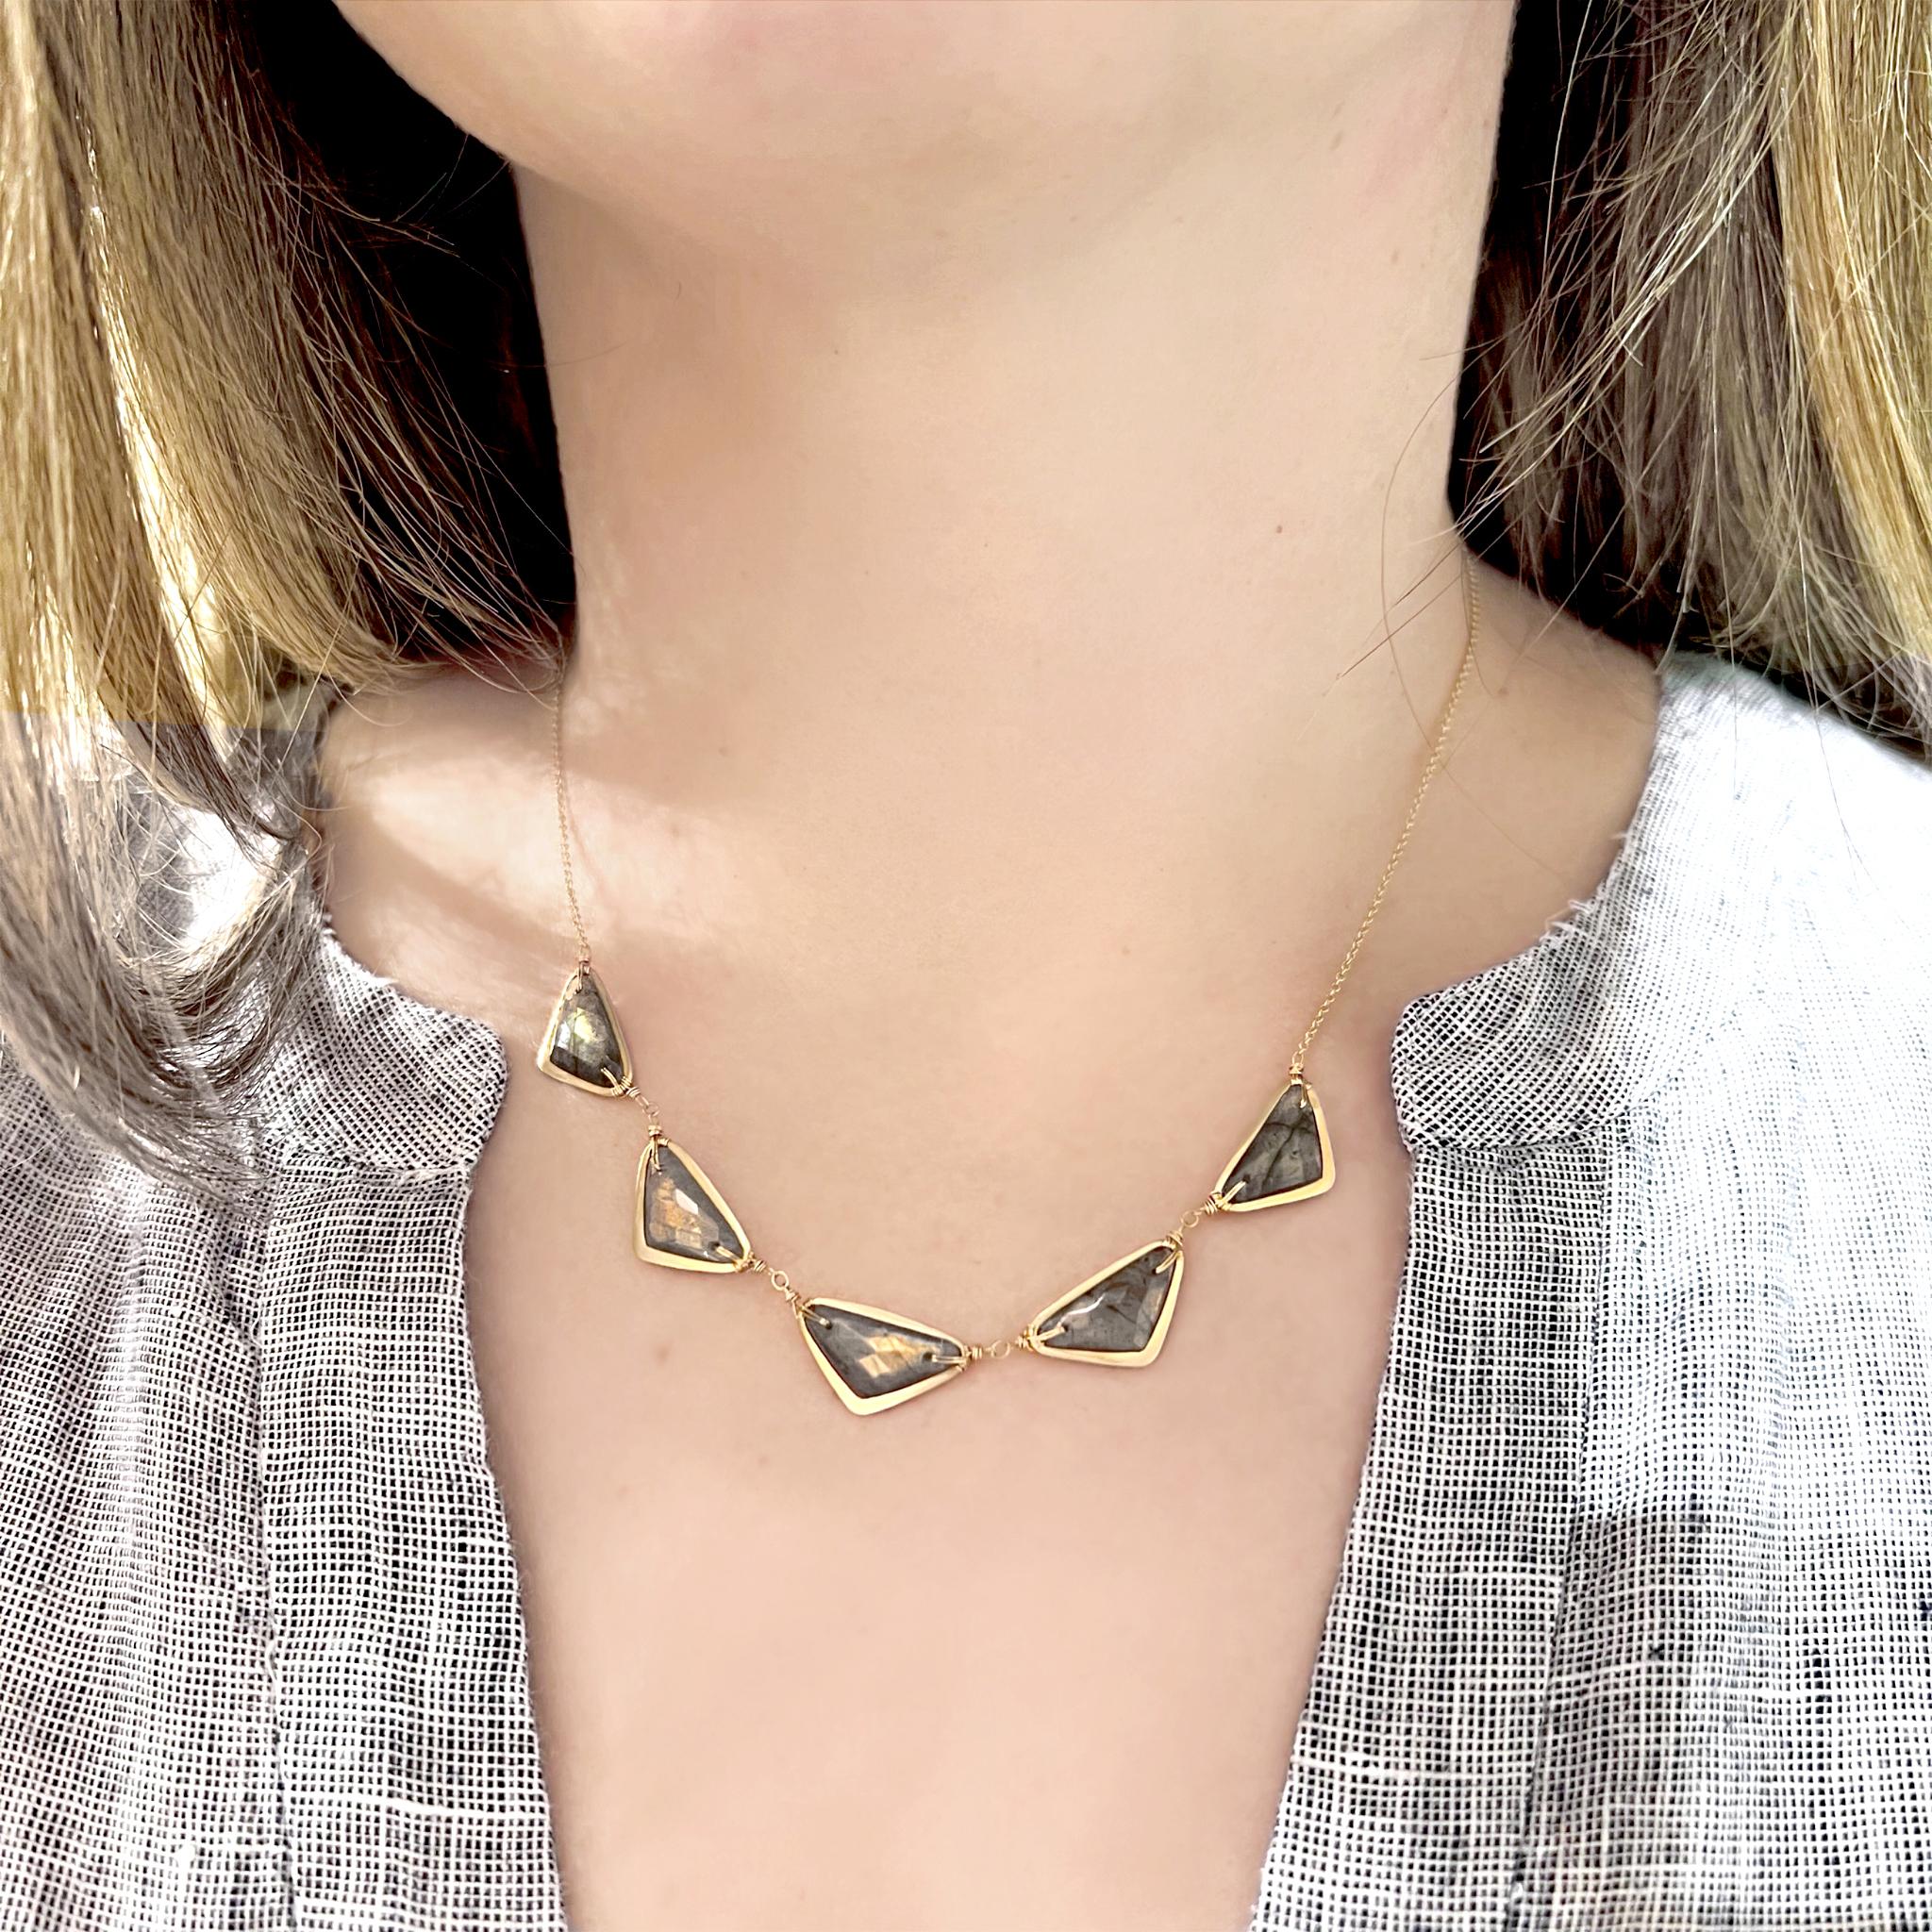 One of a Kind Necklace handmade by acclaimed jewelry designer Dana Kellin featuring five double-sided rose-cut spectrolite (finest labradorite) triangles with spectacular golden flash individually bordered in satin-finished 14k yellow gold and